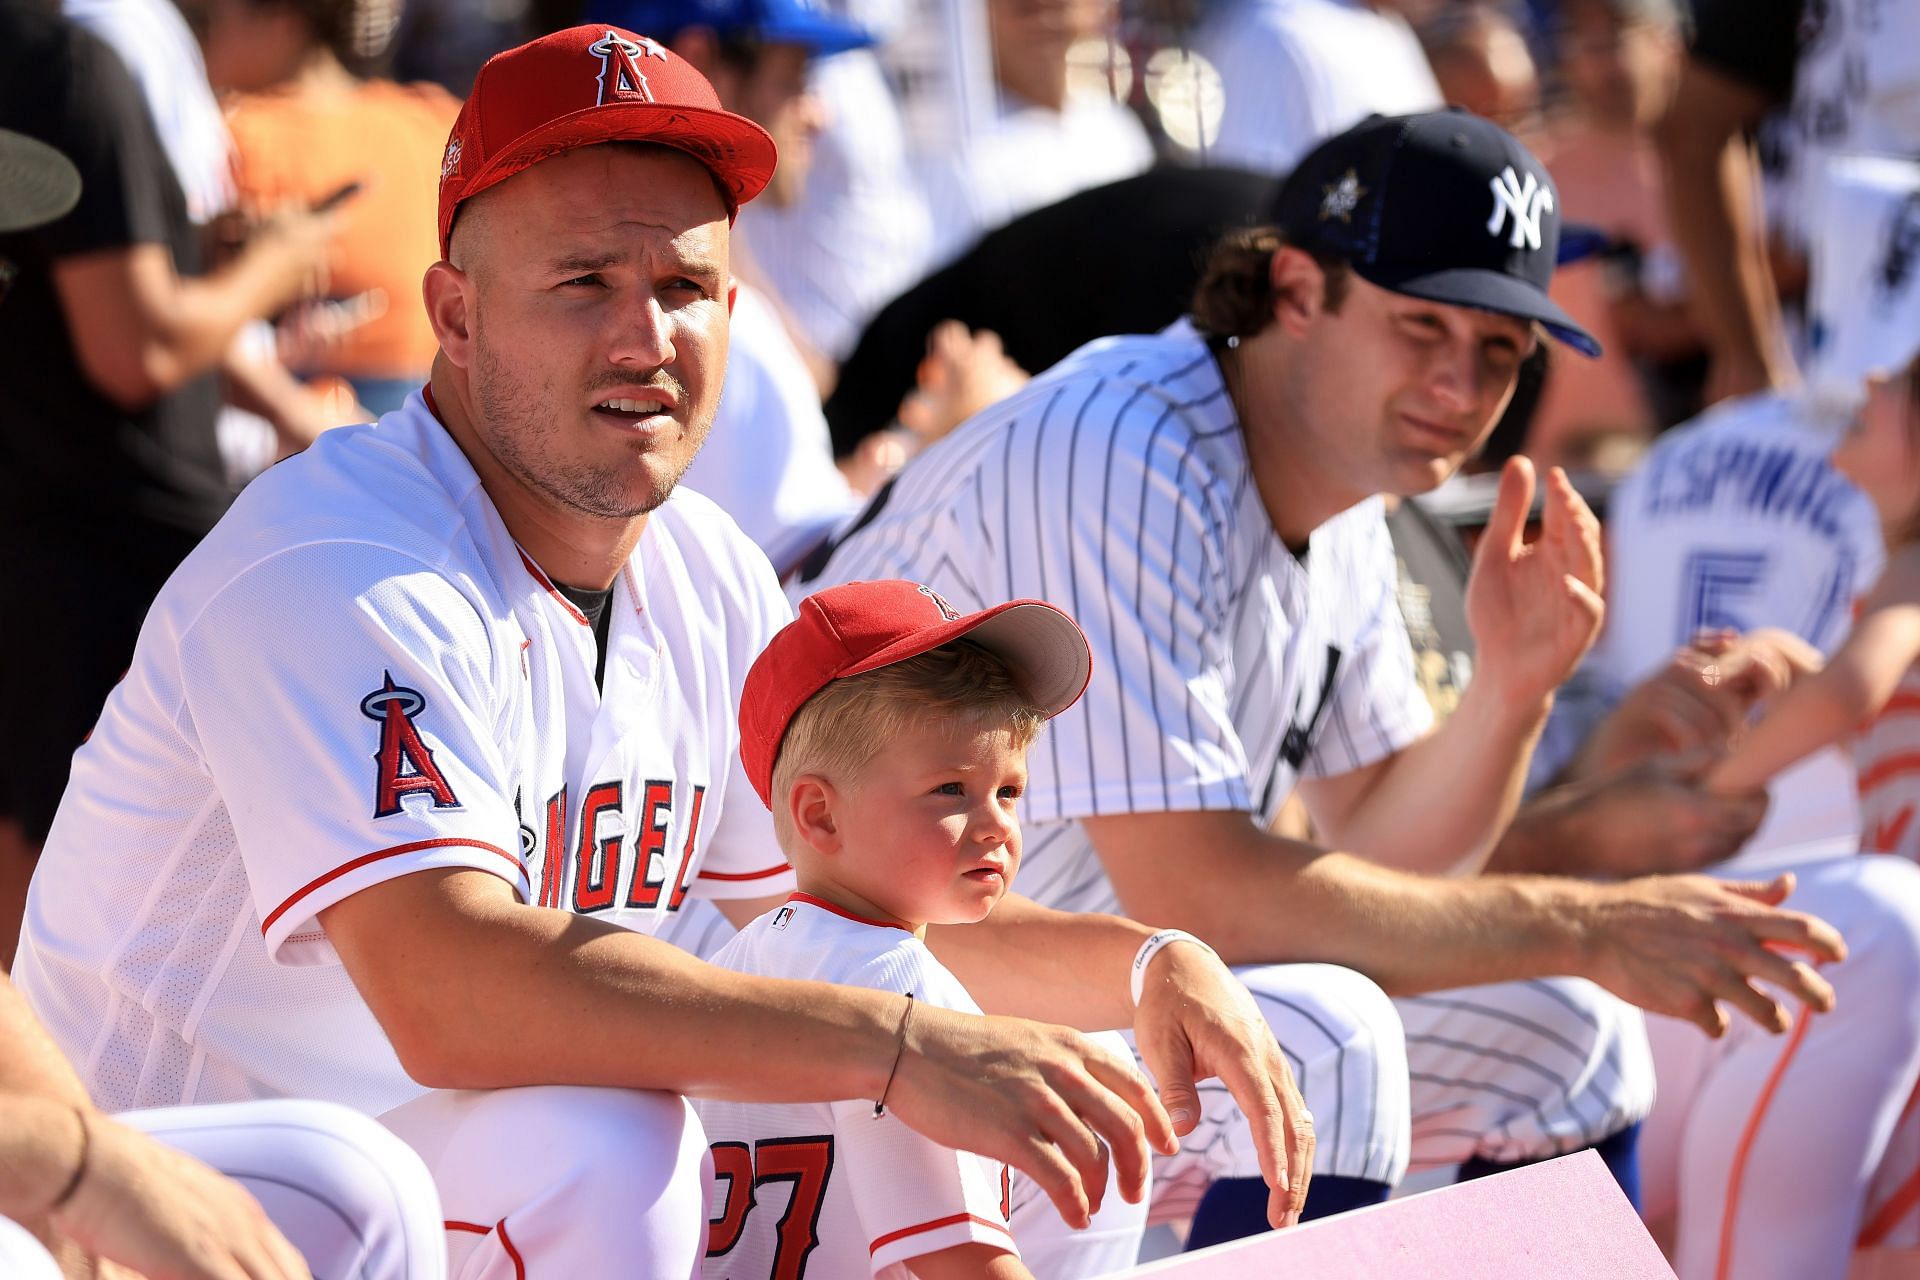 American League All-Star Mike Trout #27 of the Los Angeles Angels looks on during the 2022 T-Mobile Home Run Derby at Dodger Stadium on July 18, 2022 in Los Angeles, California.